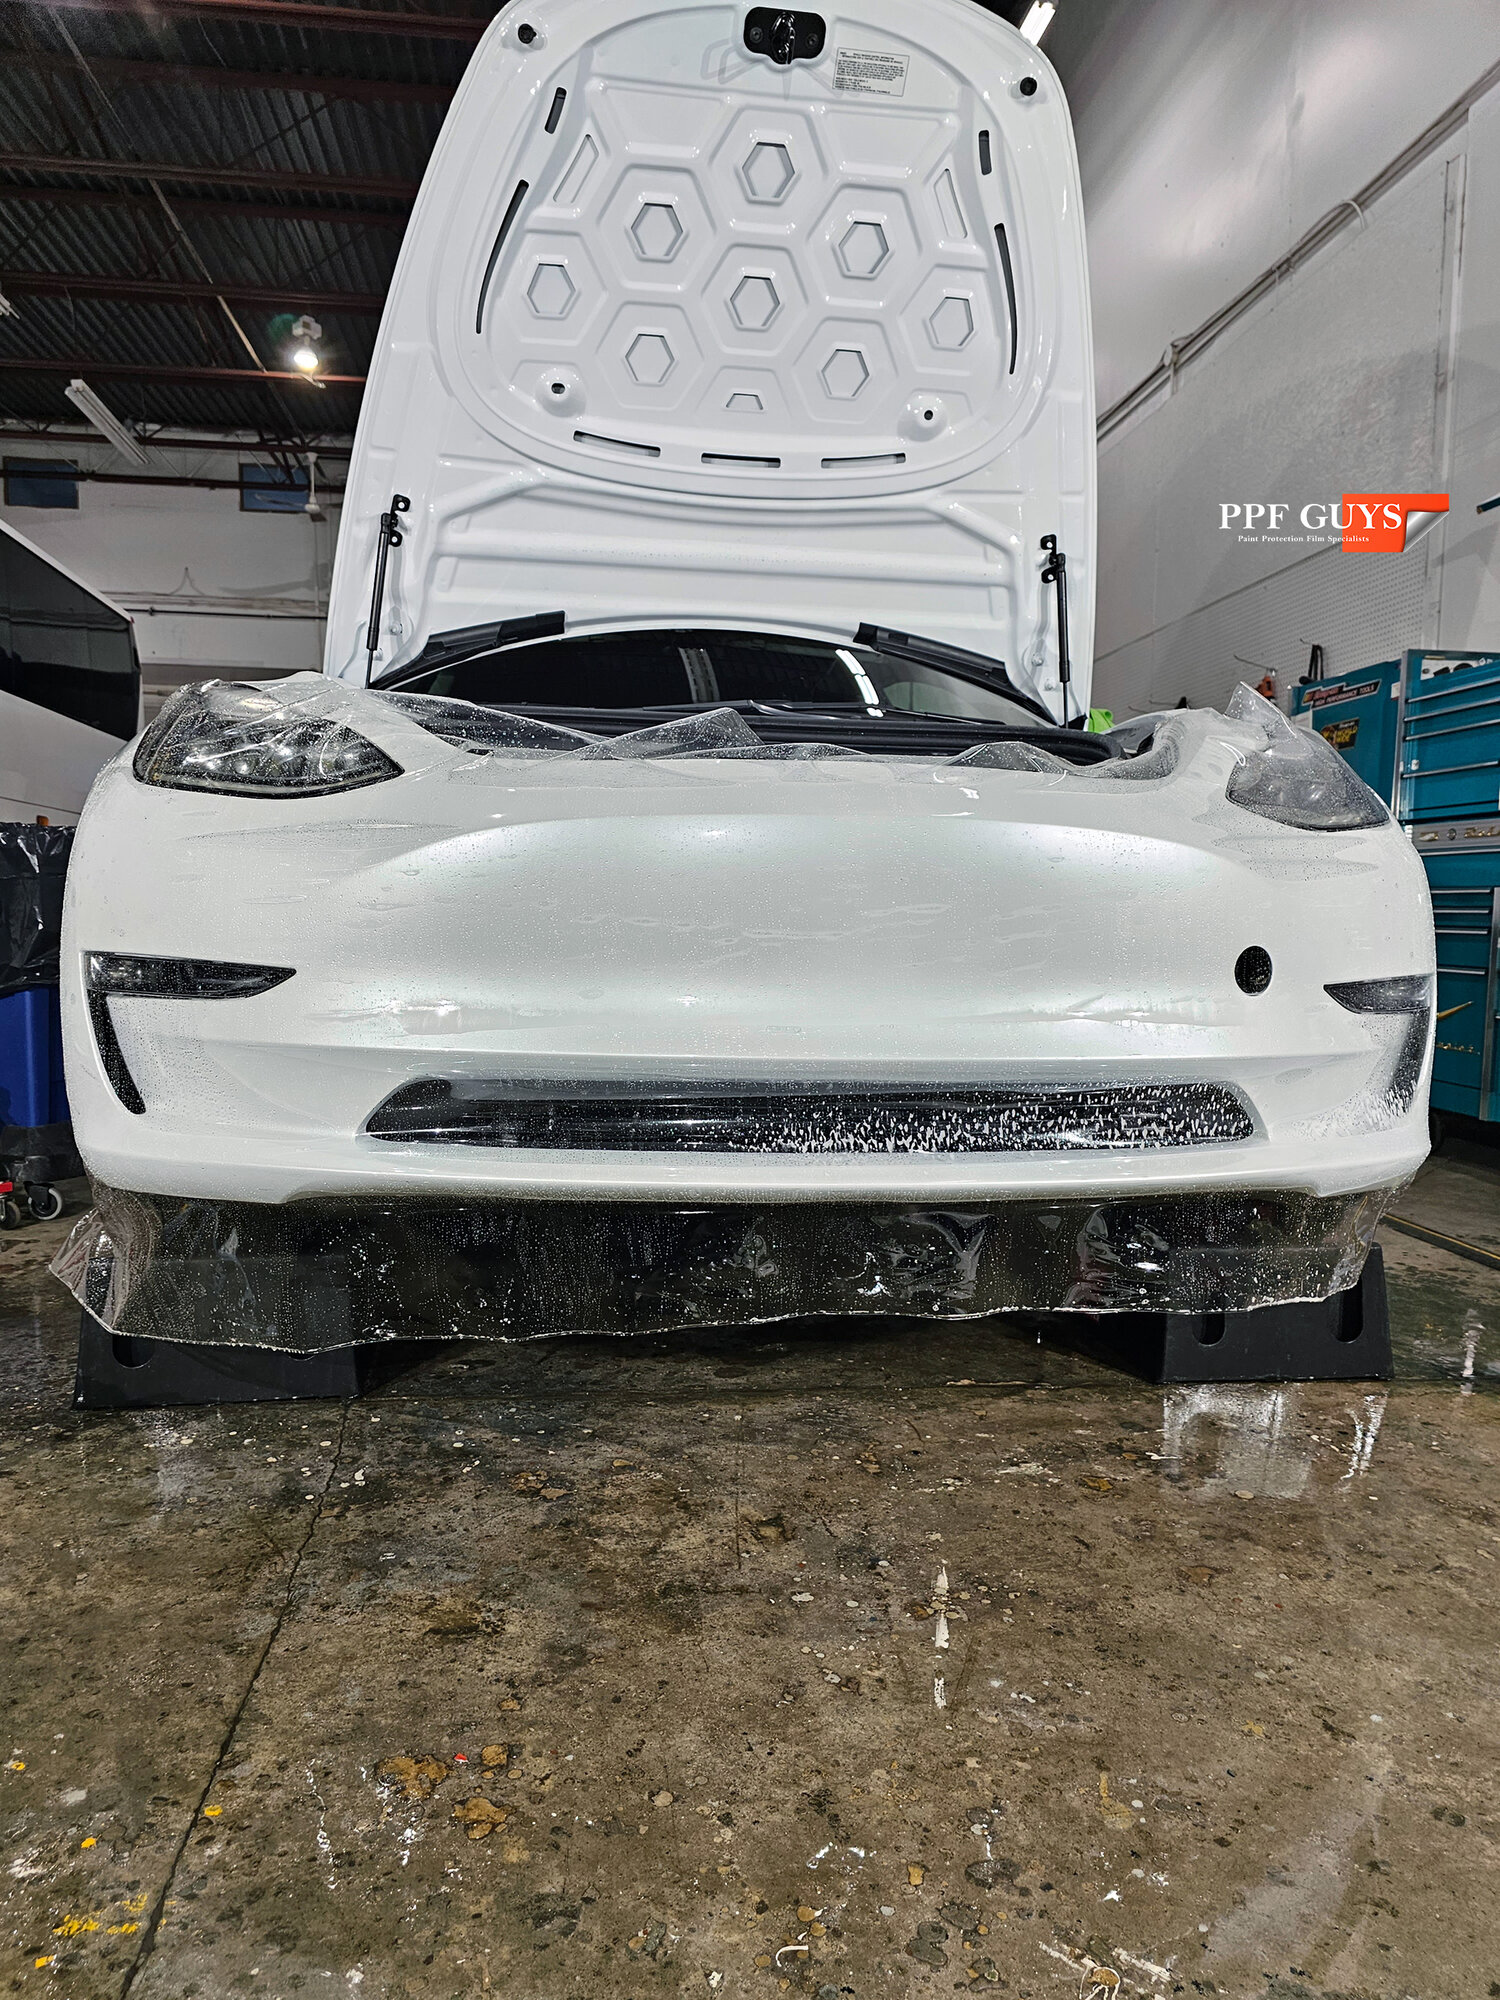 PPF Guys Model 3 White. PPF Bumper scraped and Replacement (8).jpg